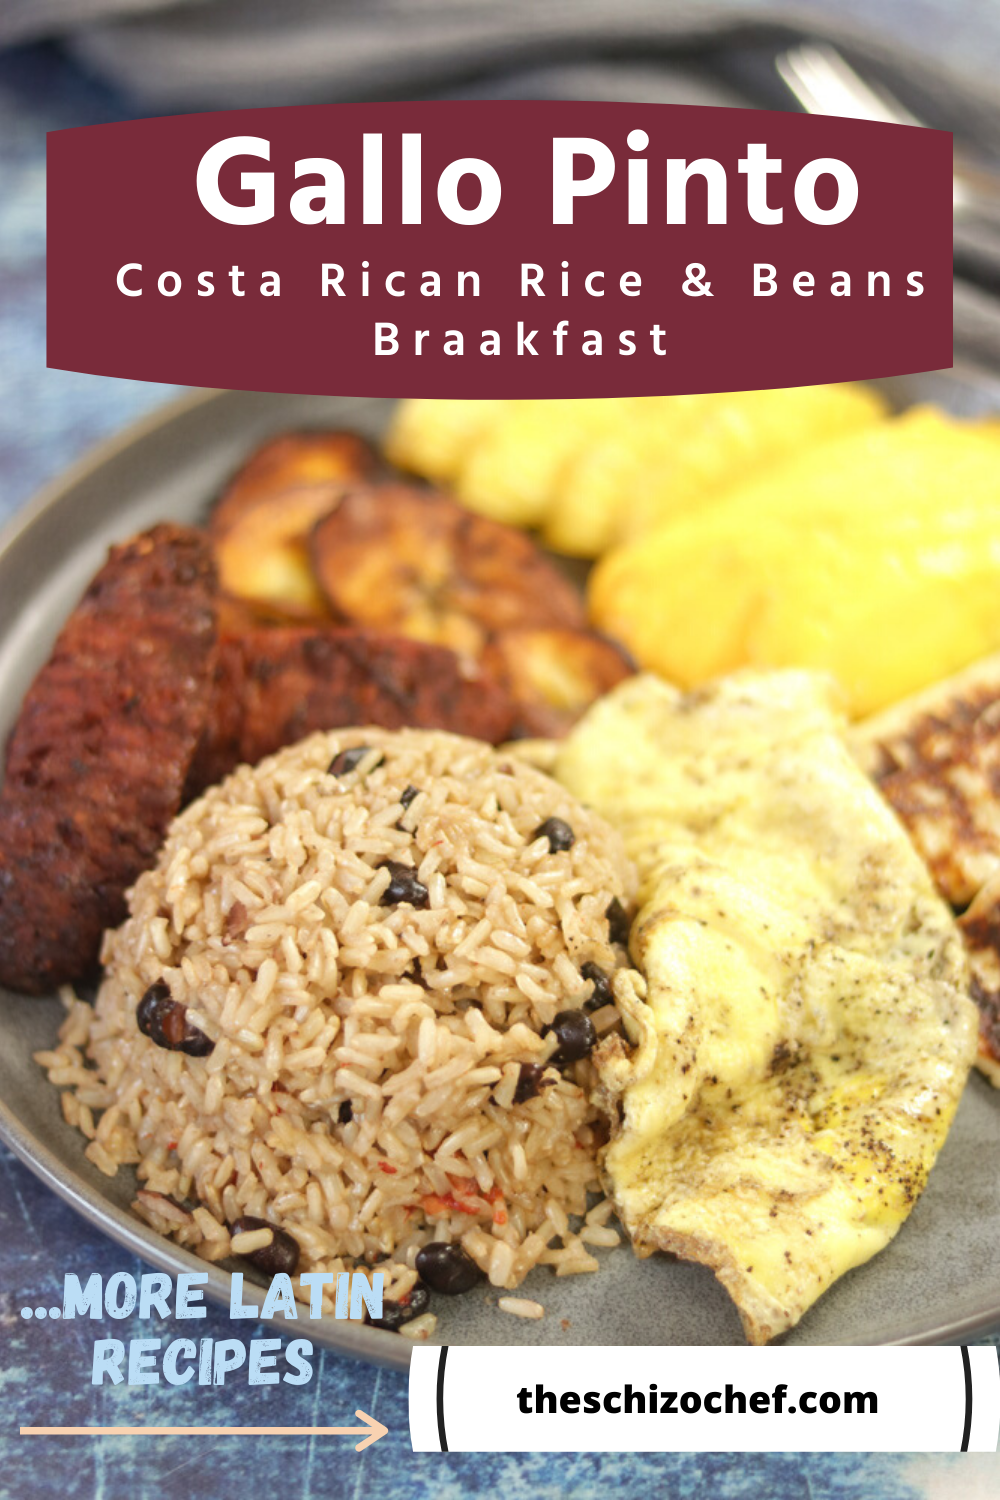 Gallo Pinto - Costa Rican Rice & Beans Breakfast Platter with text for Pinterest